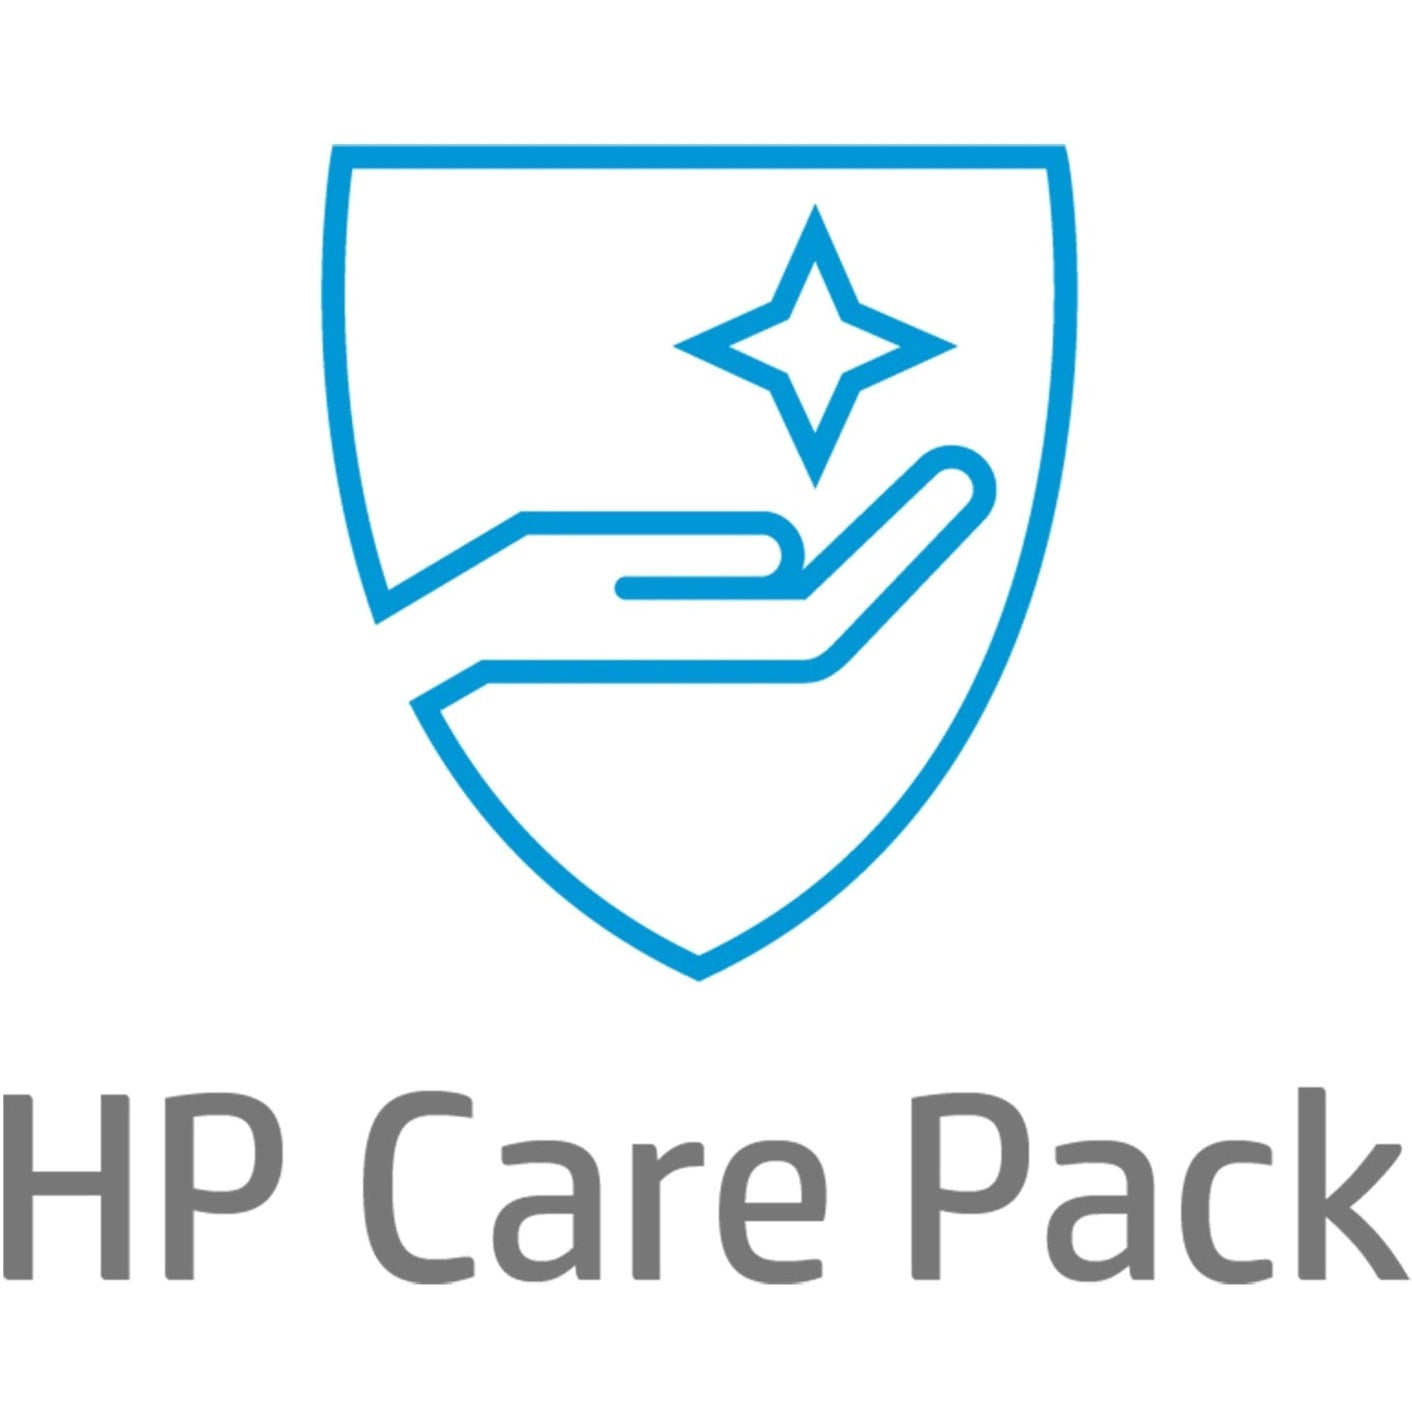 HP Care Pack Hardware Support - 1 Year - Service (UJ890PE)